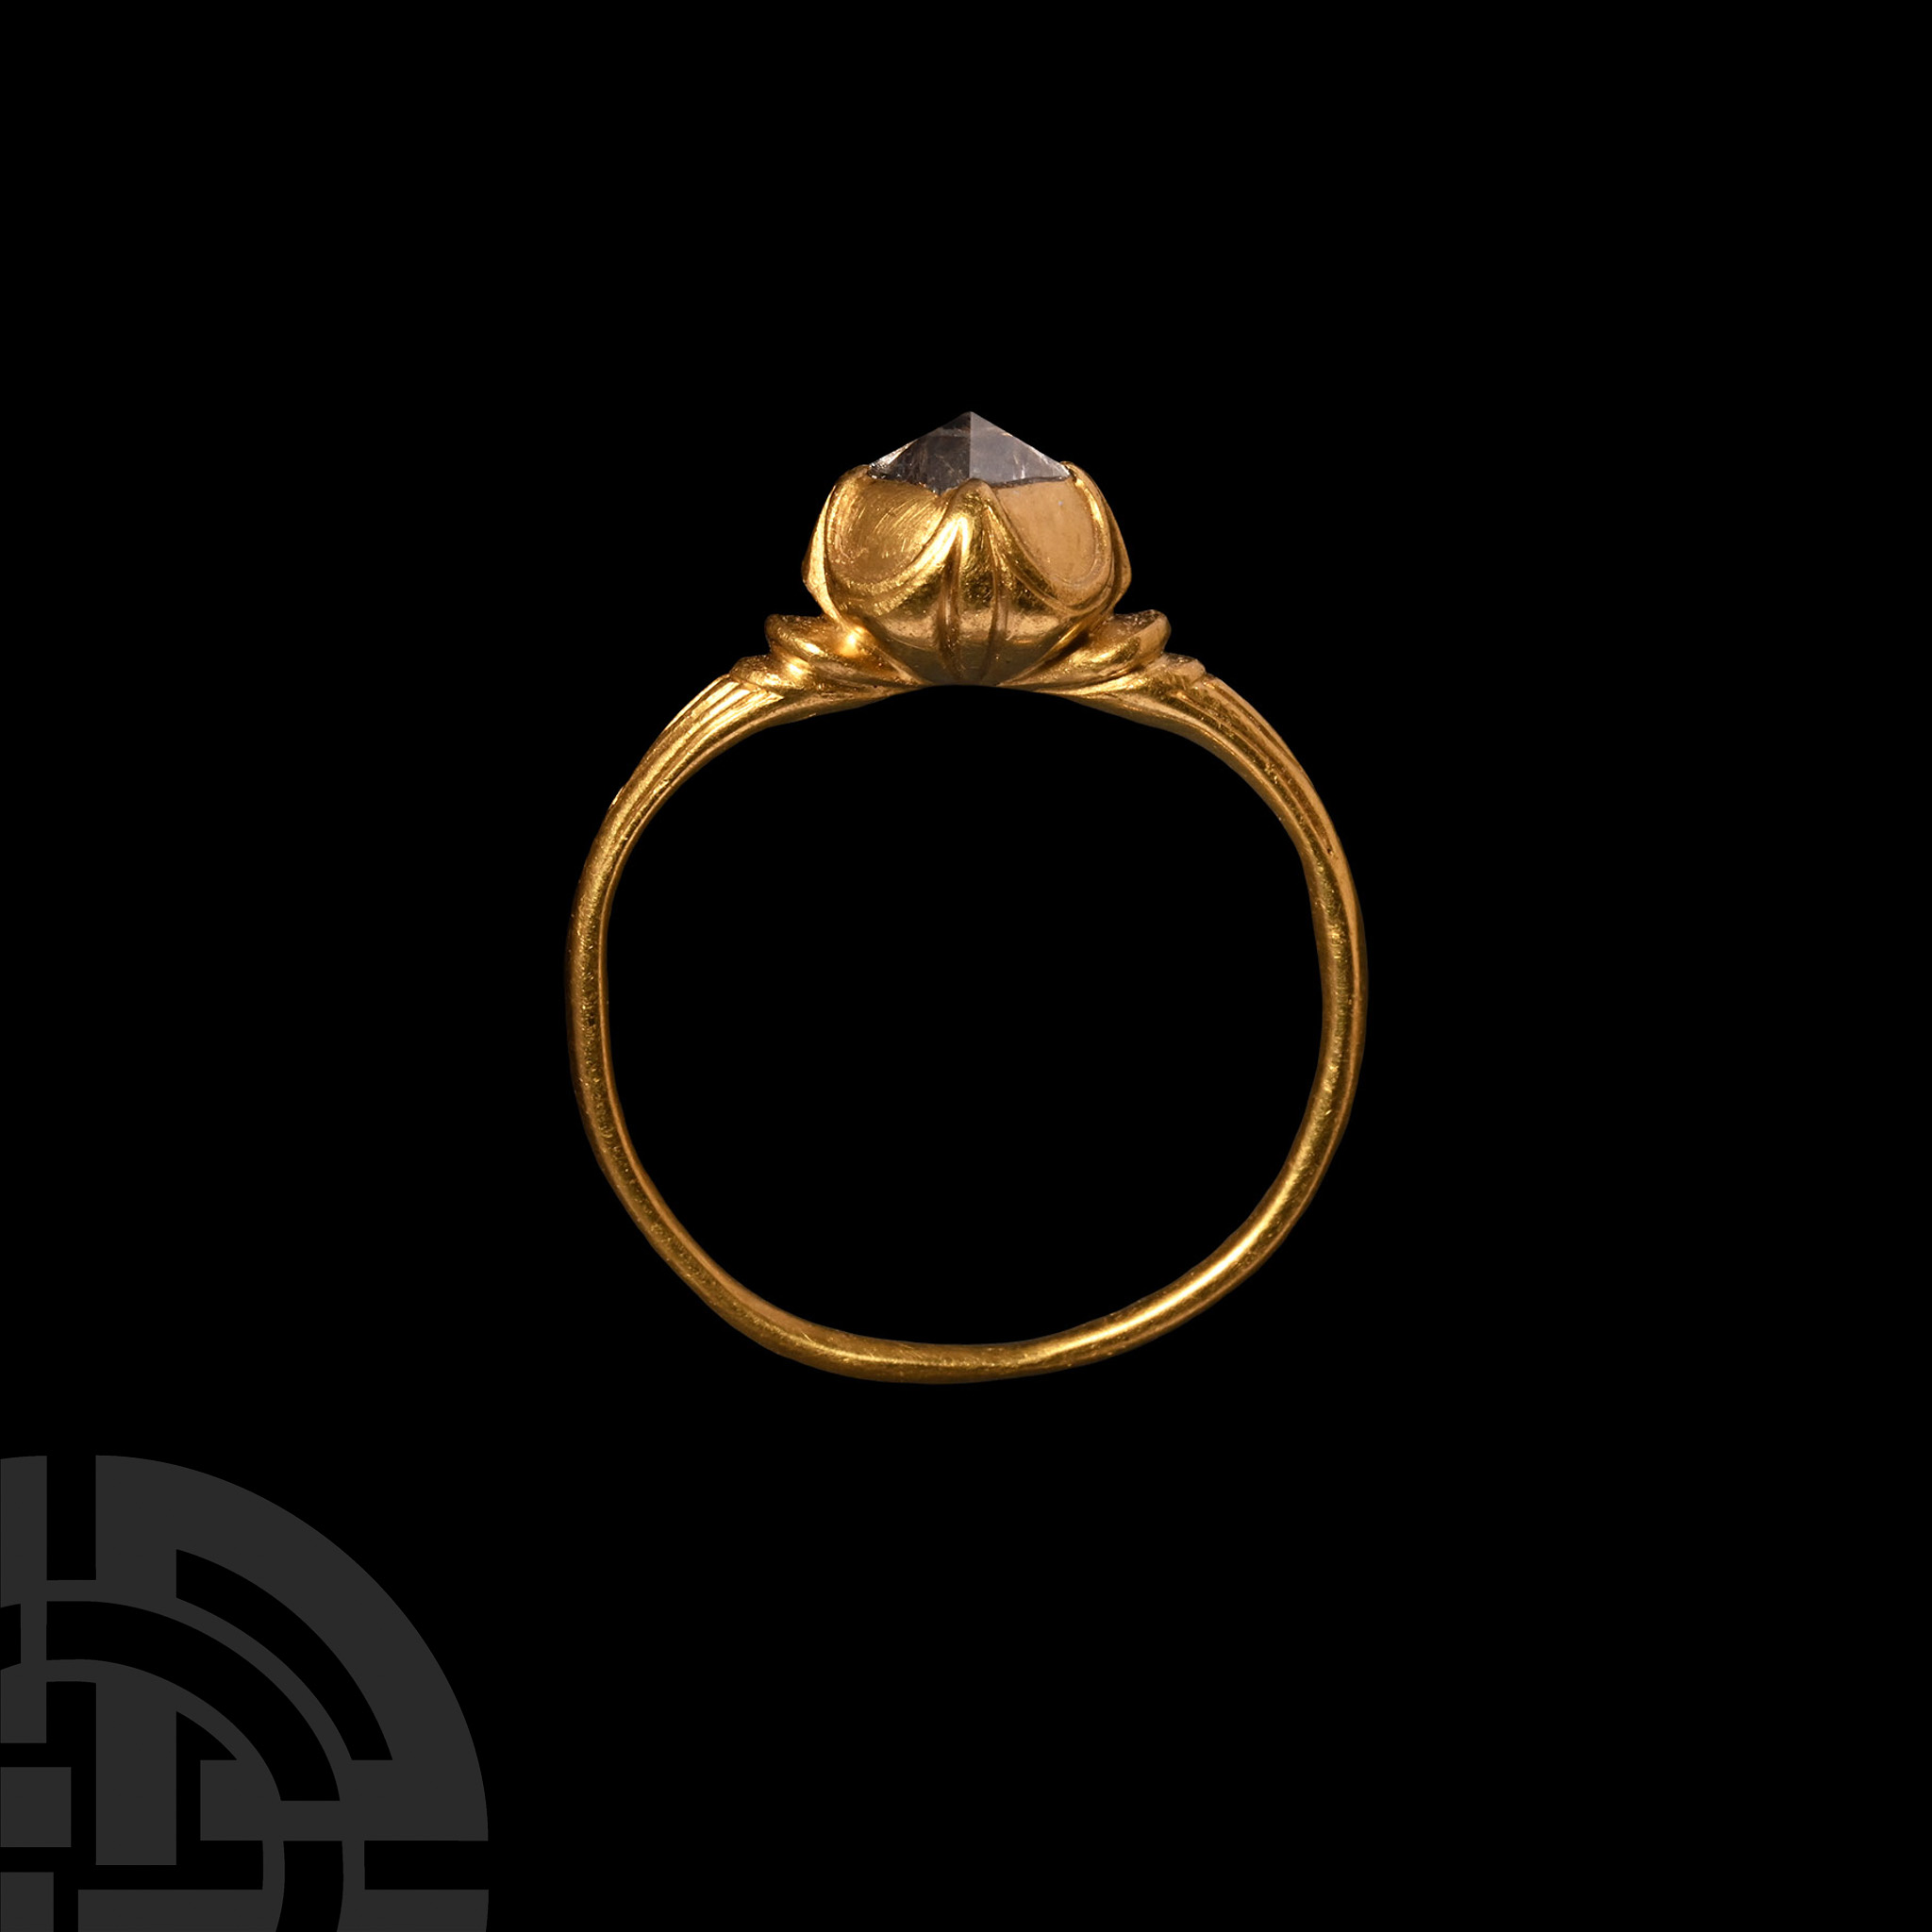 Elizabethan Period Gold Ring with Polished Natural Diamond Crystal - Image 2 of 2